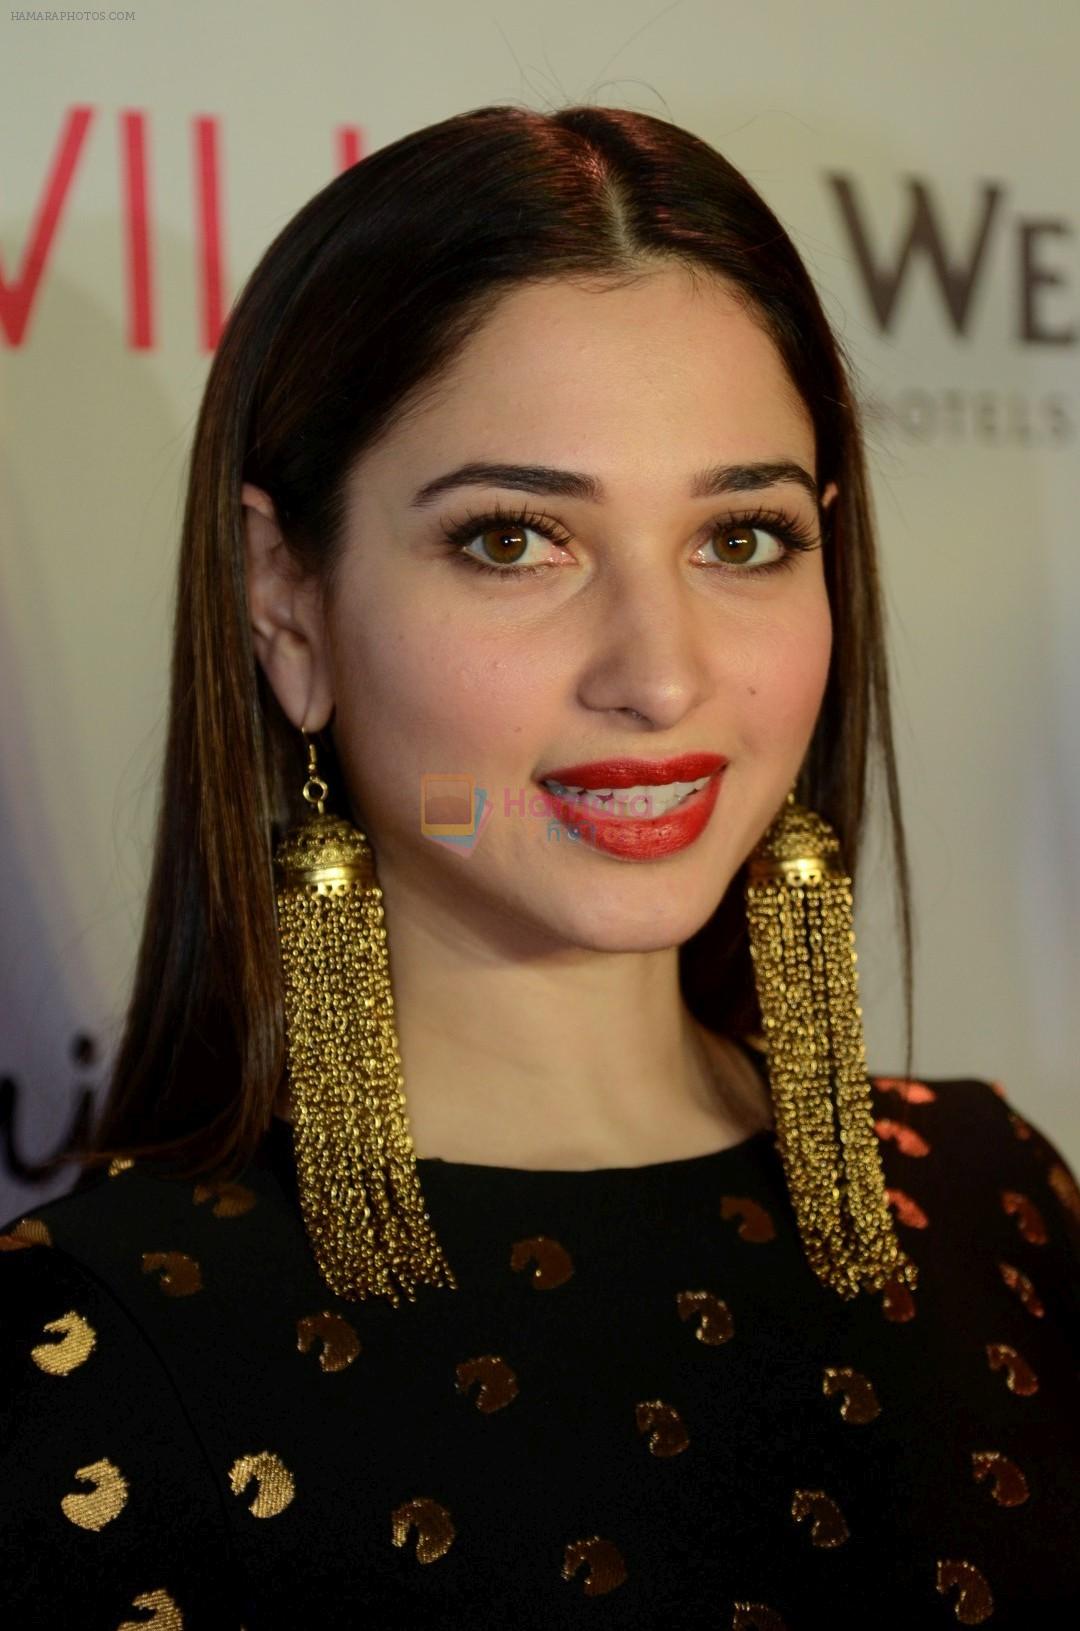 Tamannaah Bhatia Showcase The Collection Inspired By Bahubali 2-The Conclusion